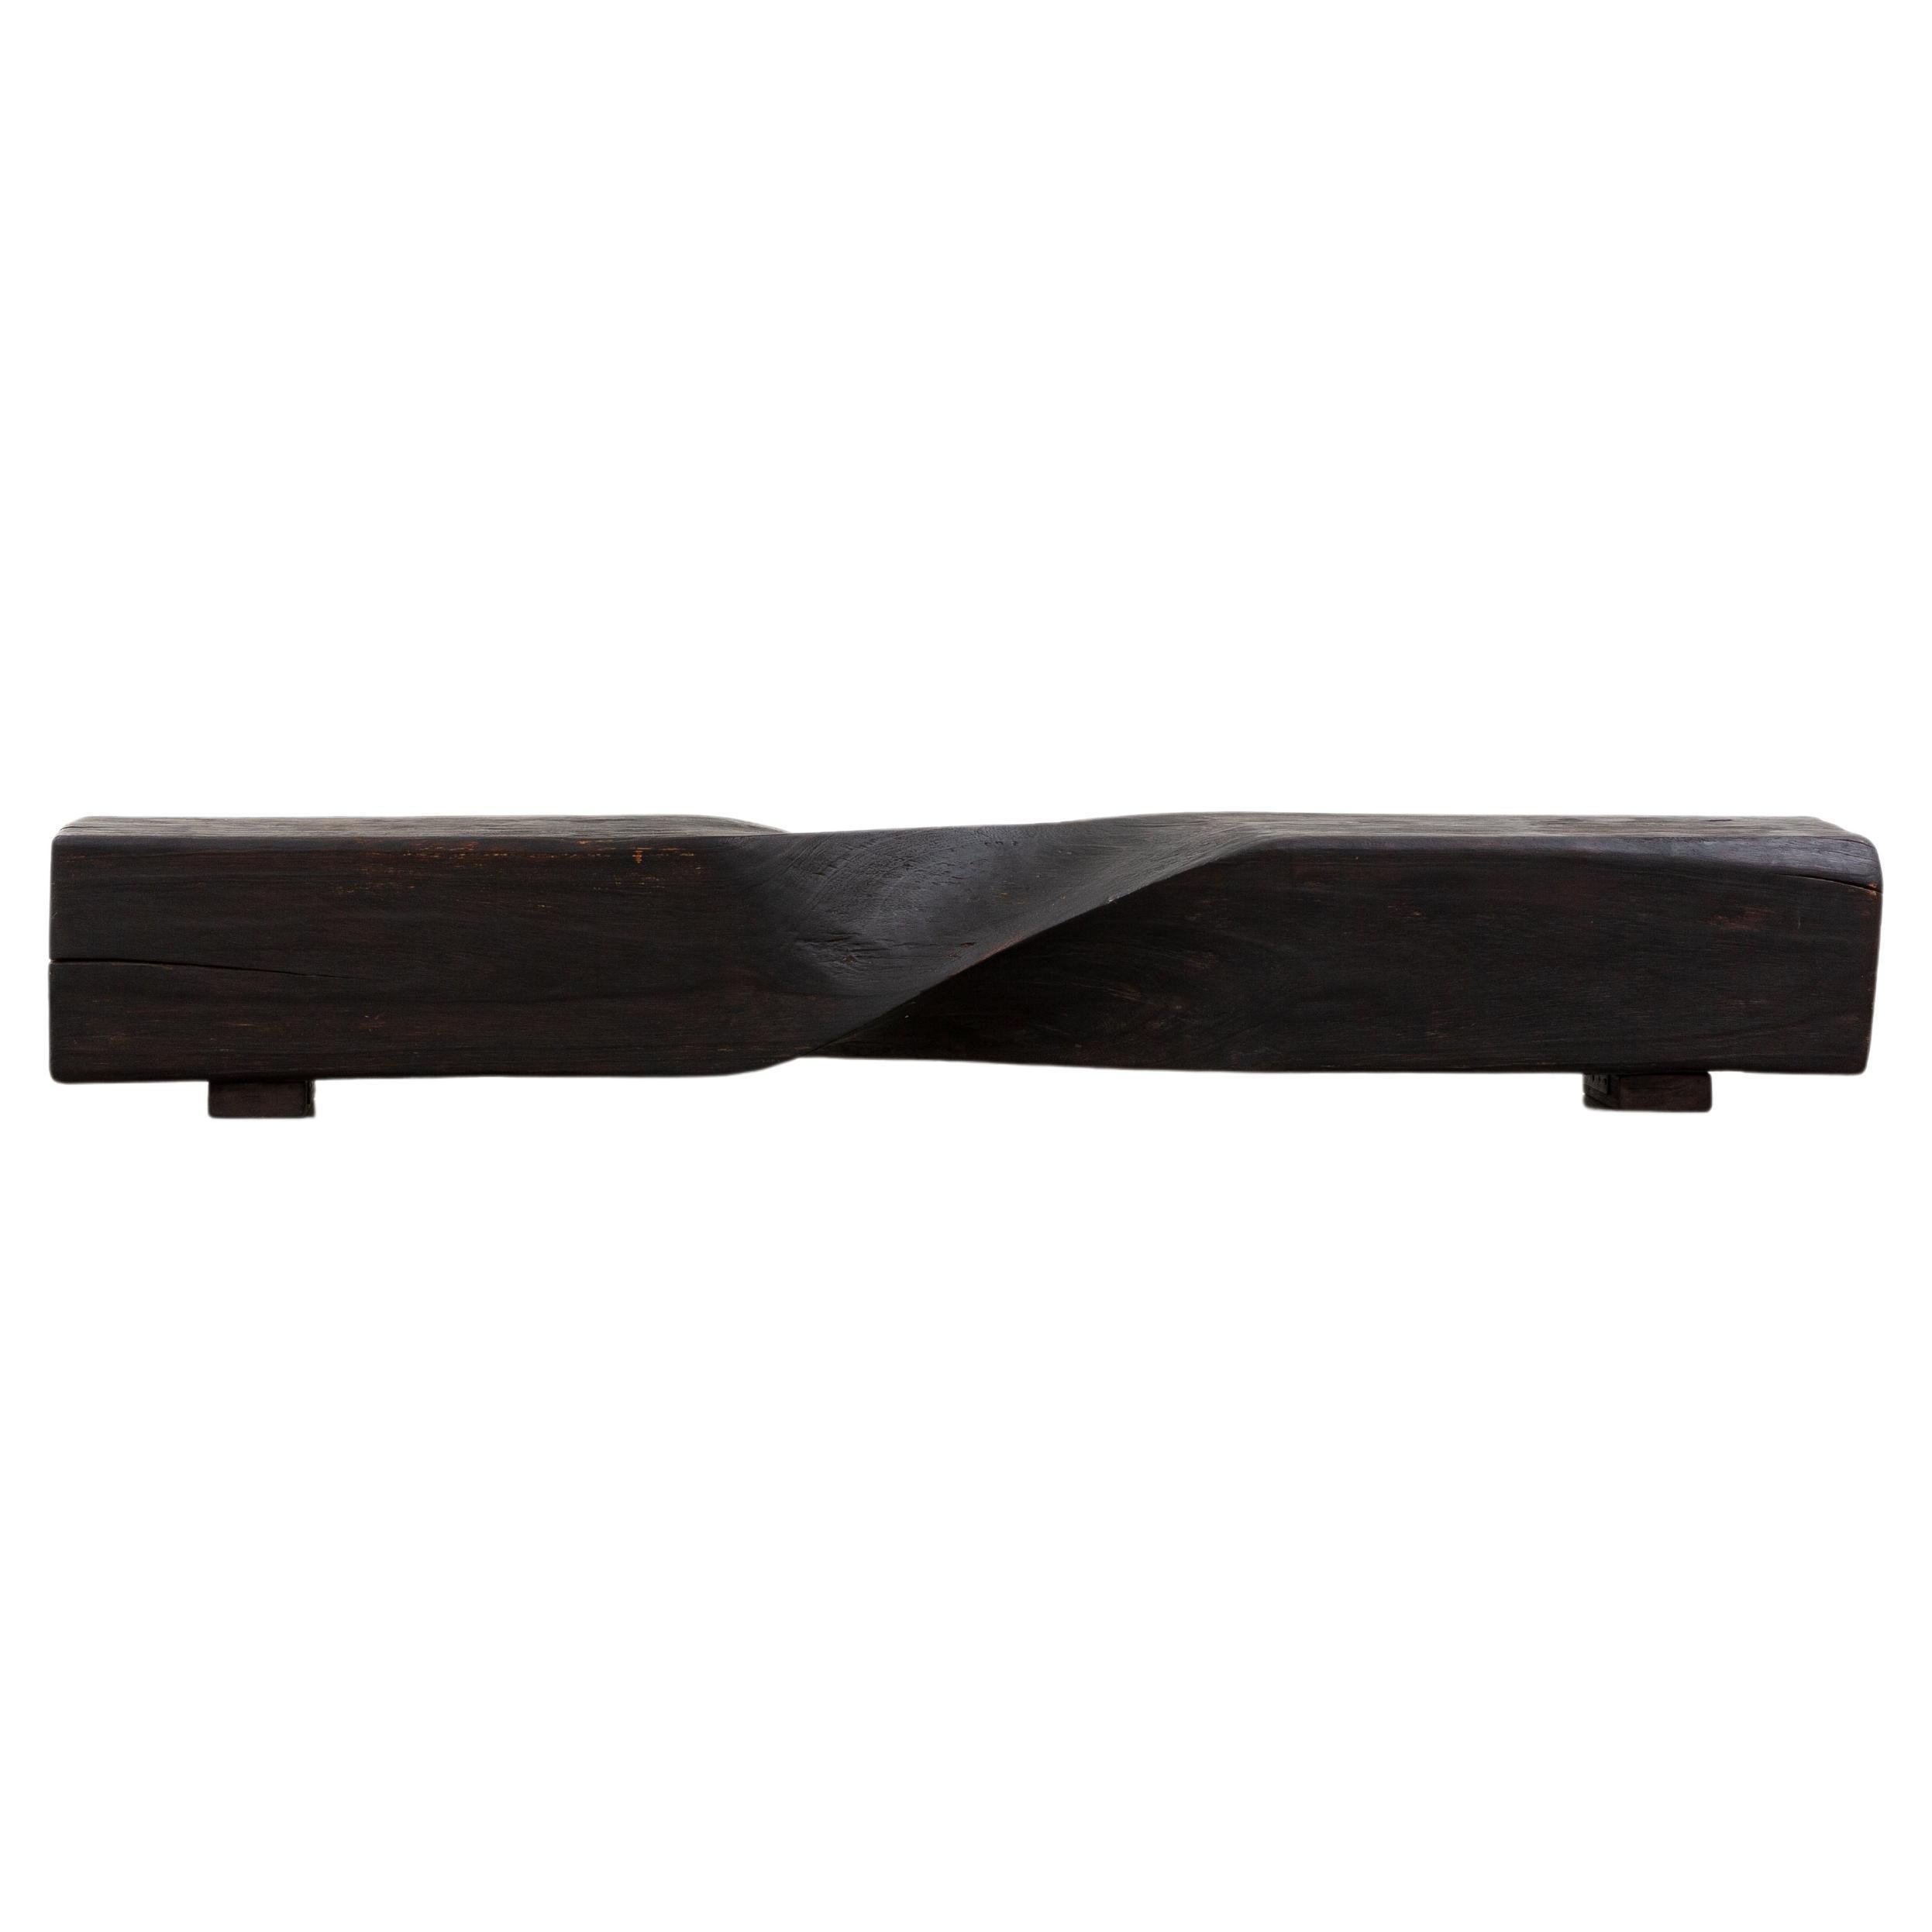 Twist Solid Wood Bench by CEU Studio, Represented by Tuleste Factory